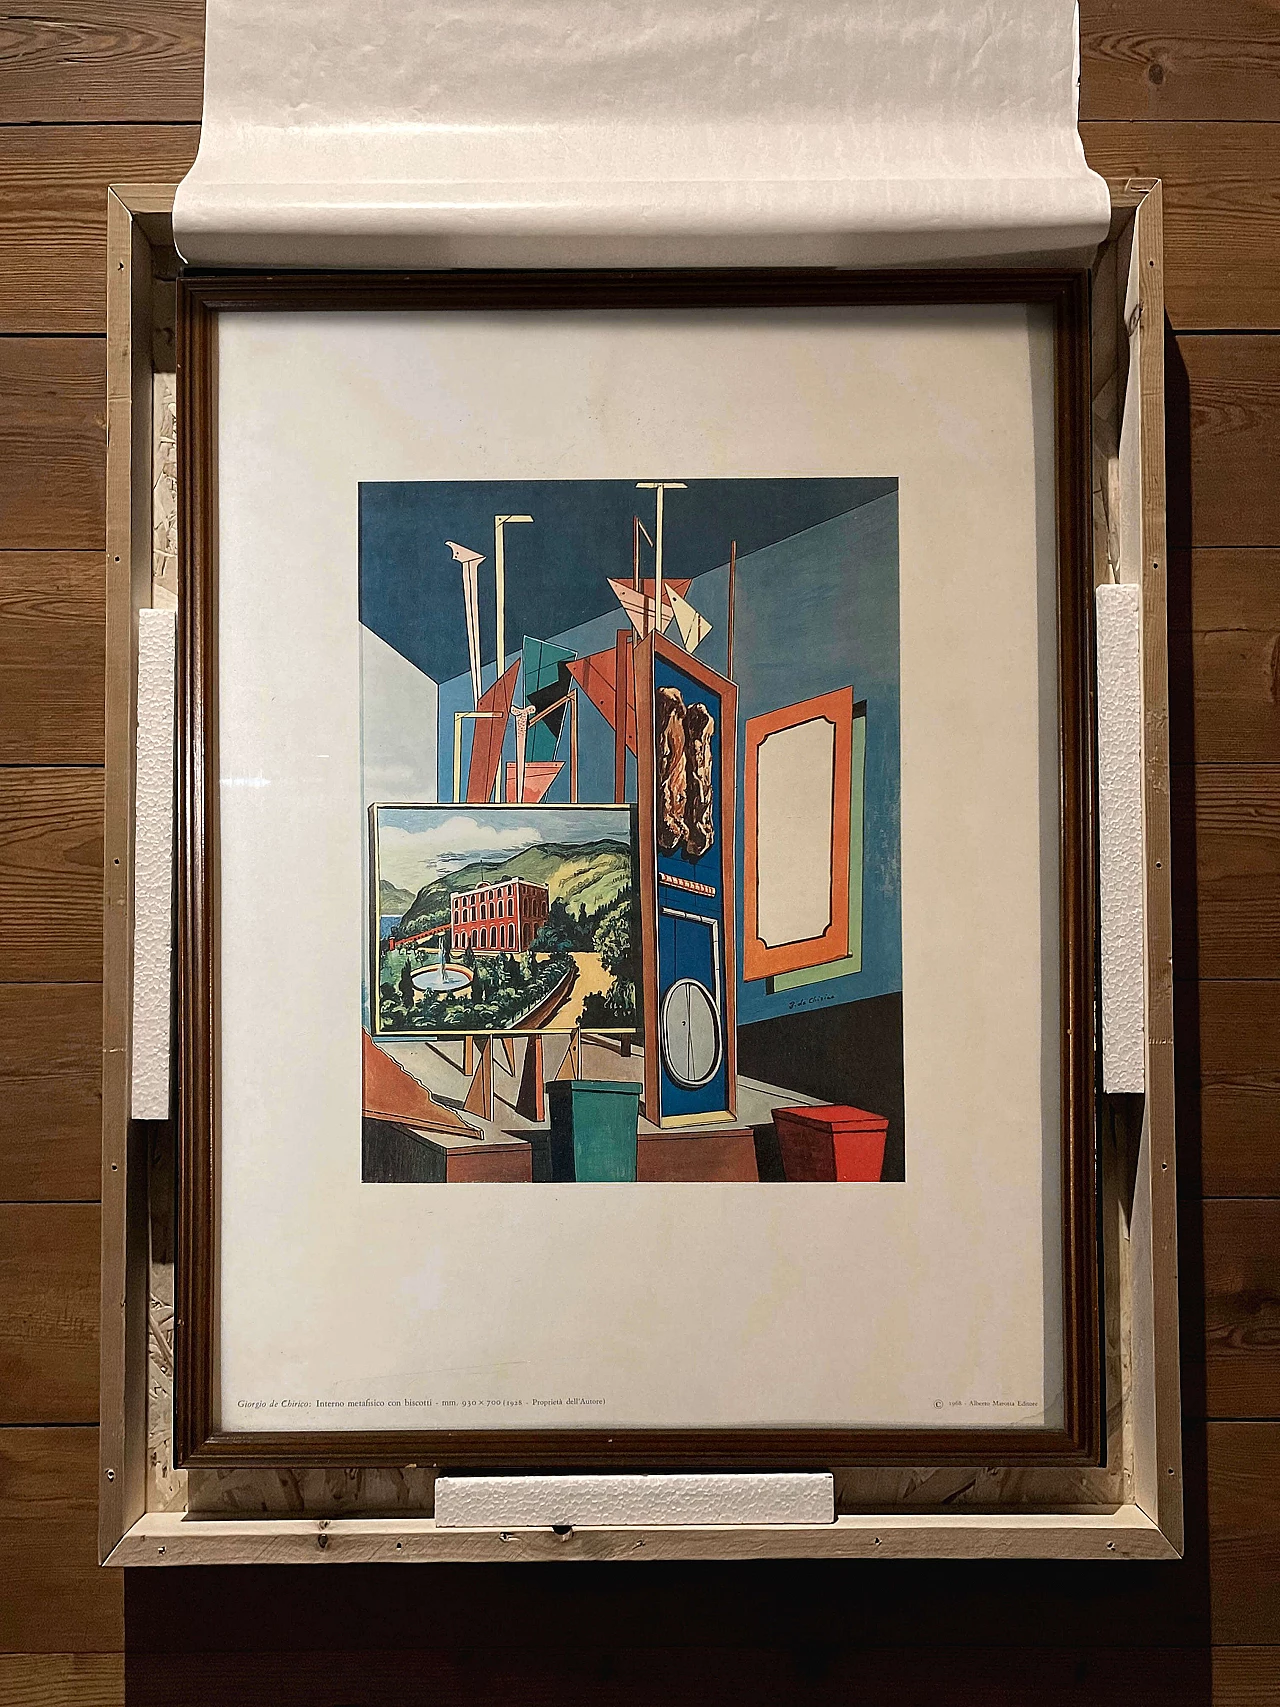 Giorgio De Chirico, Metaphysical interior with biscuits, lithography, 1968 18